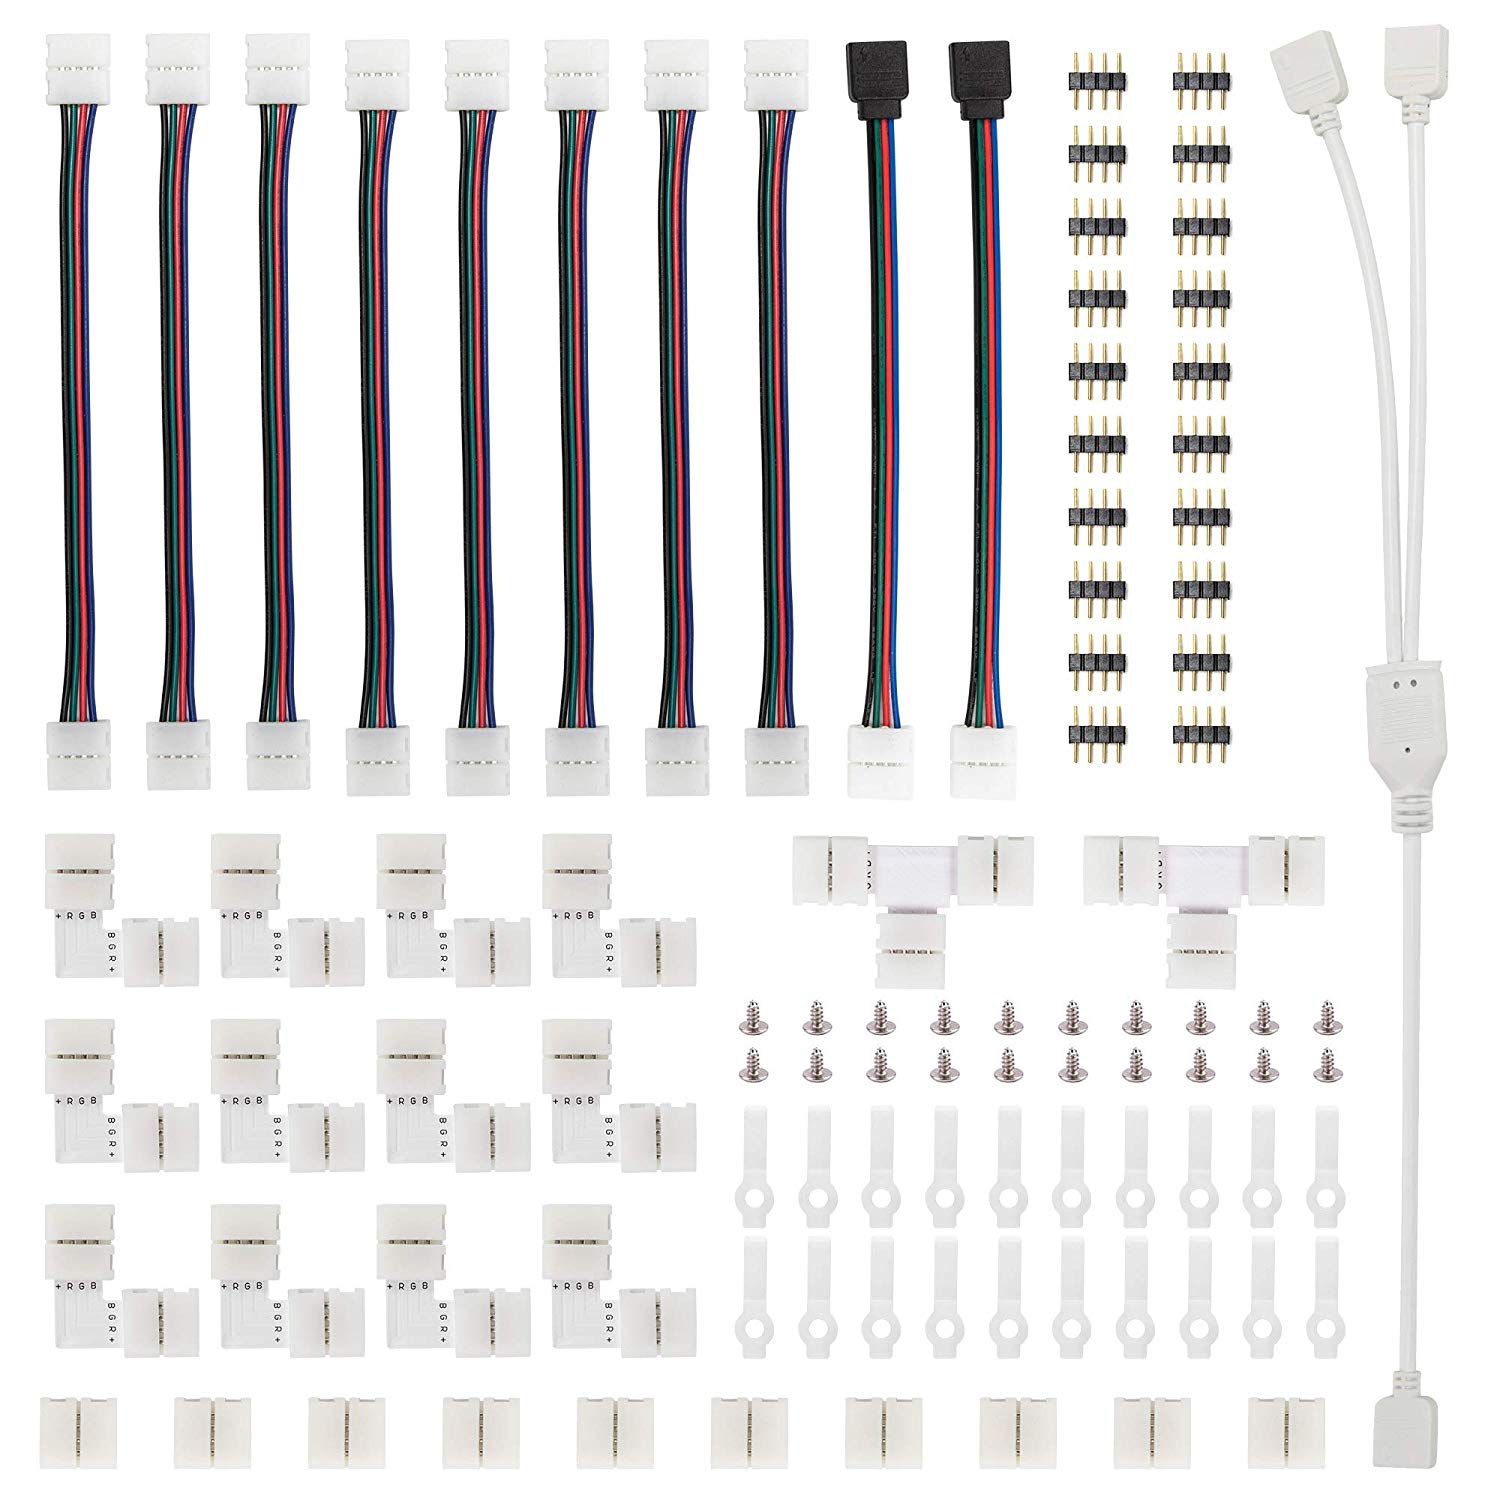 RGB-LED-Strip-Connector-Kit-for-10mm-4Pin-5050-Includes-8-Types-of-Solderless-Accessories-Provides-M-1613391-1